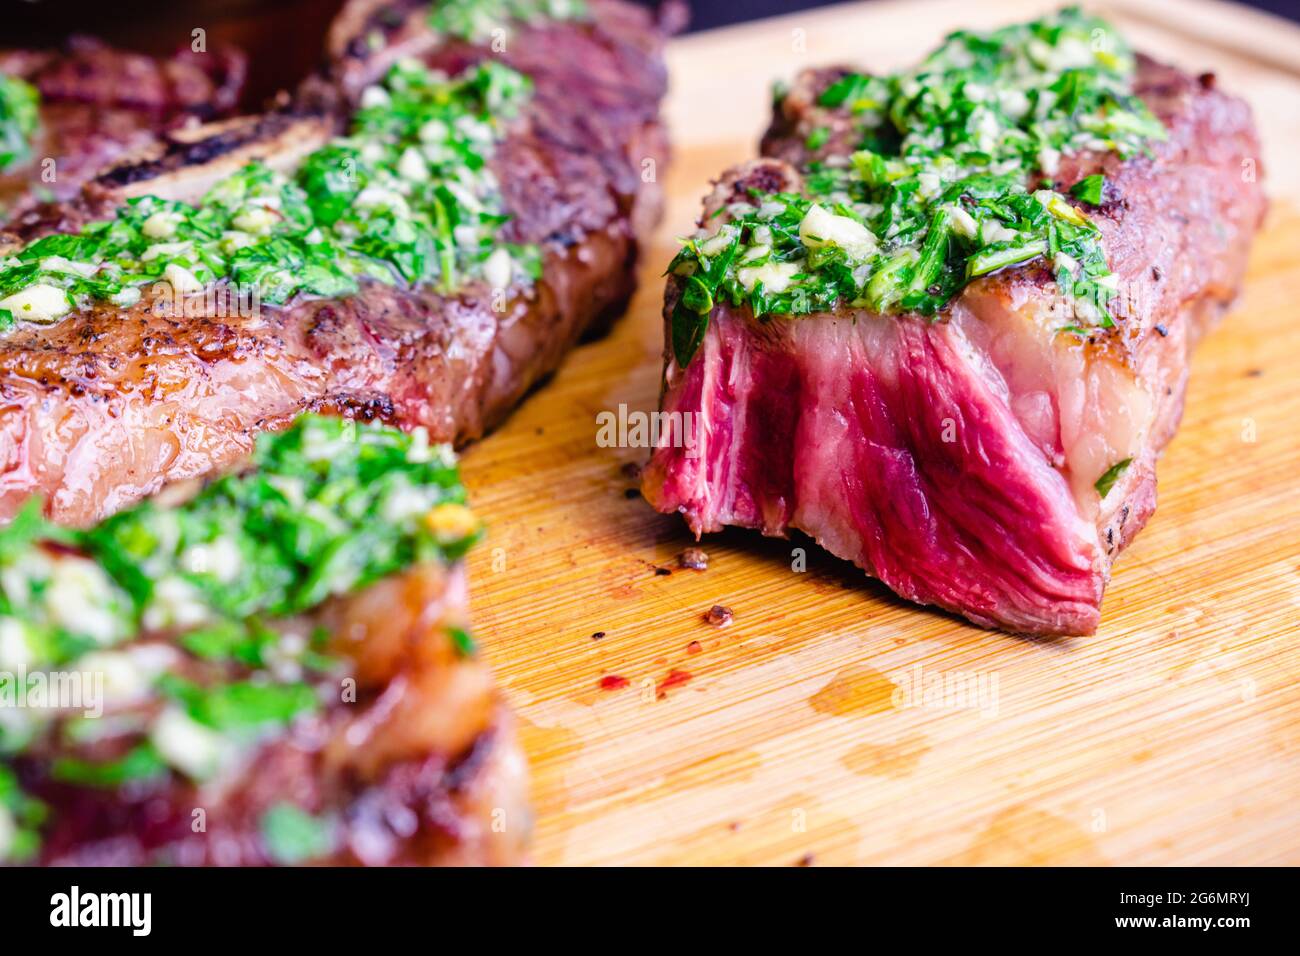 Argentinean-Style Grilled Short Ribs With Chimichurri: Barbecued flanken beef ribs on a bamboo cutting board Stock Photo